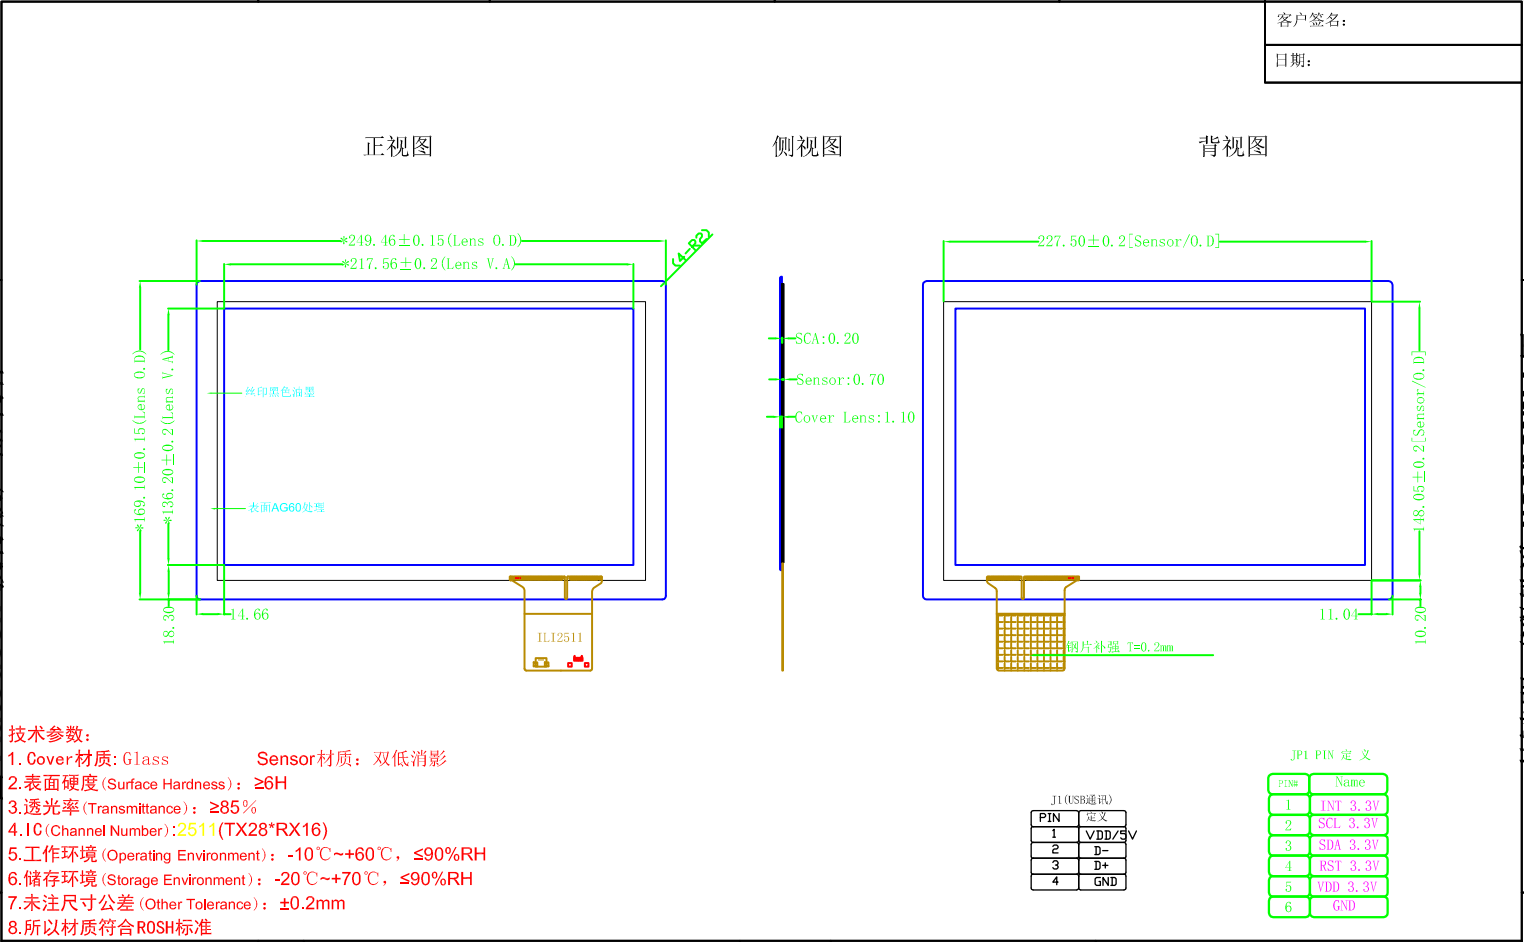 Drawing of 10.1 inch USB Touch Screen (PCAP)